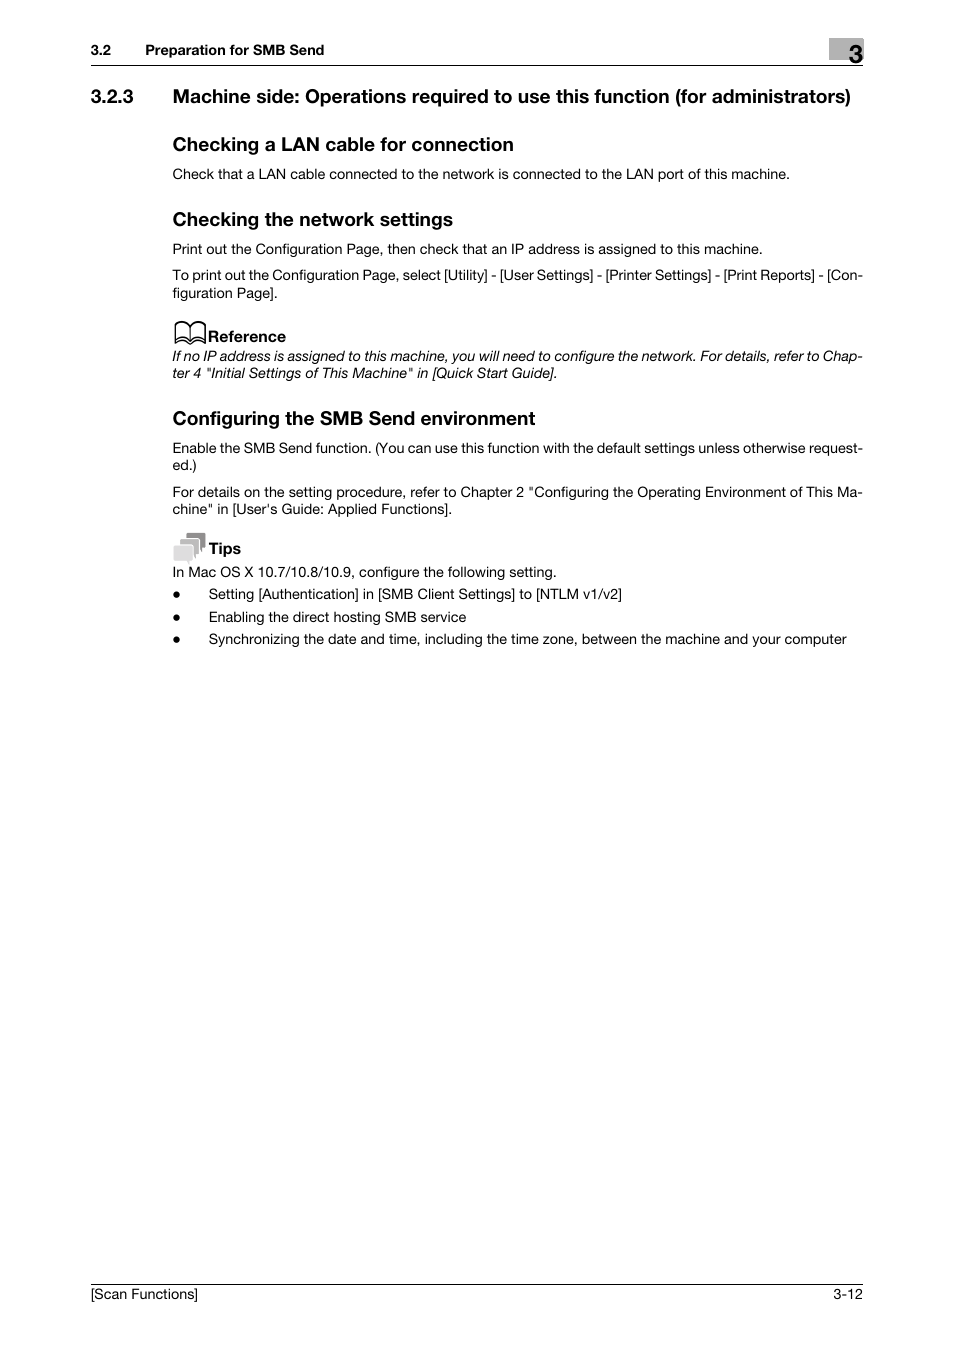 Checking a lan cable for connection, Checking the network settings, Configuring the smb send environment | Konica Minolta bizhub 4750 User Manual | Page 43 / 102